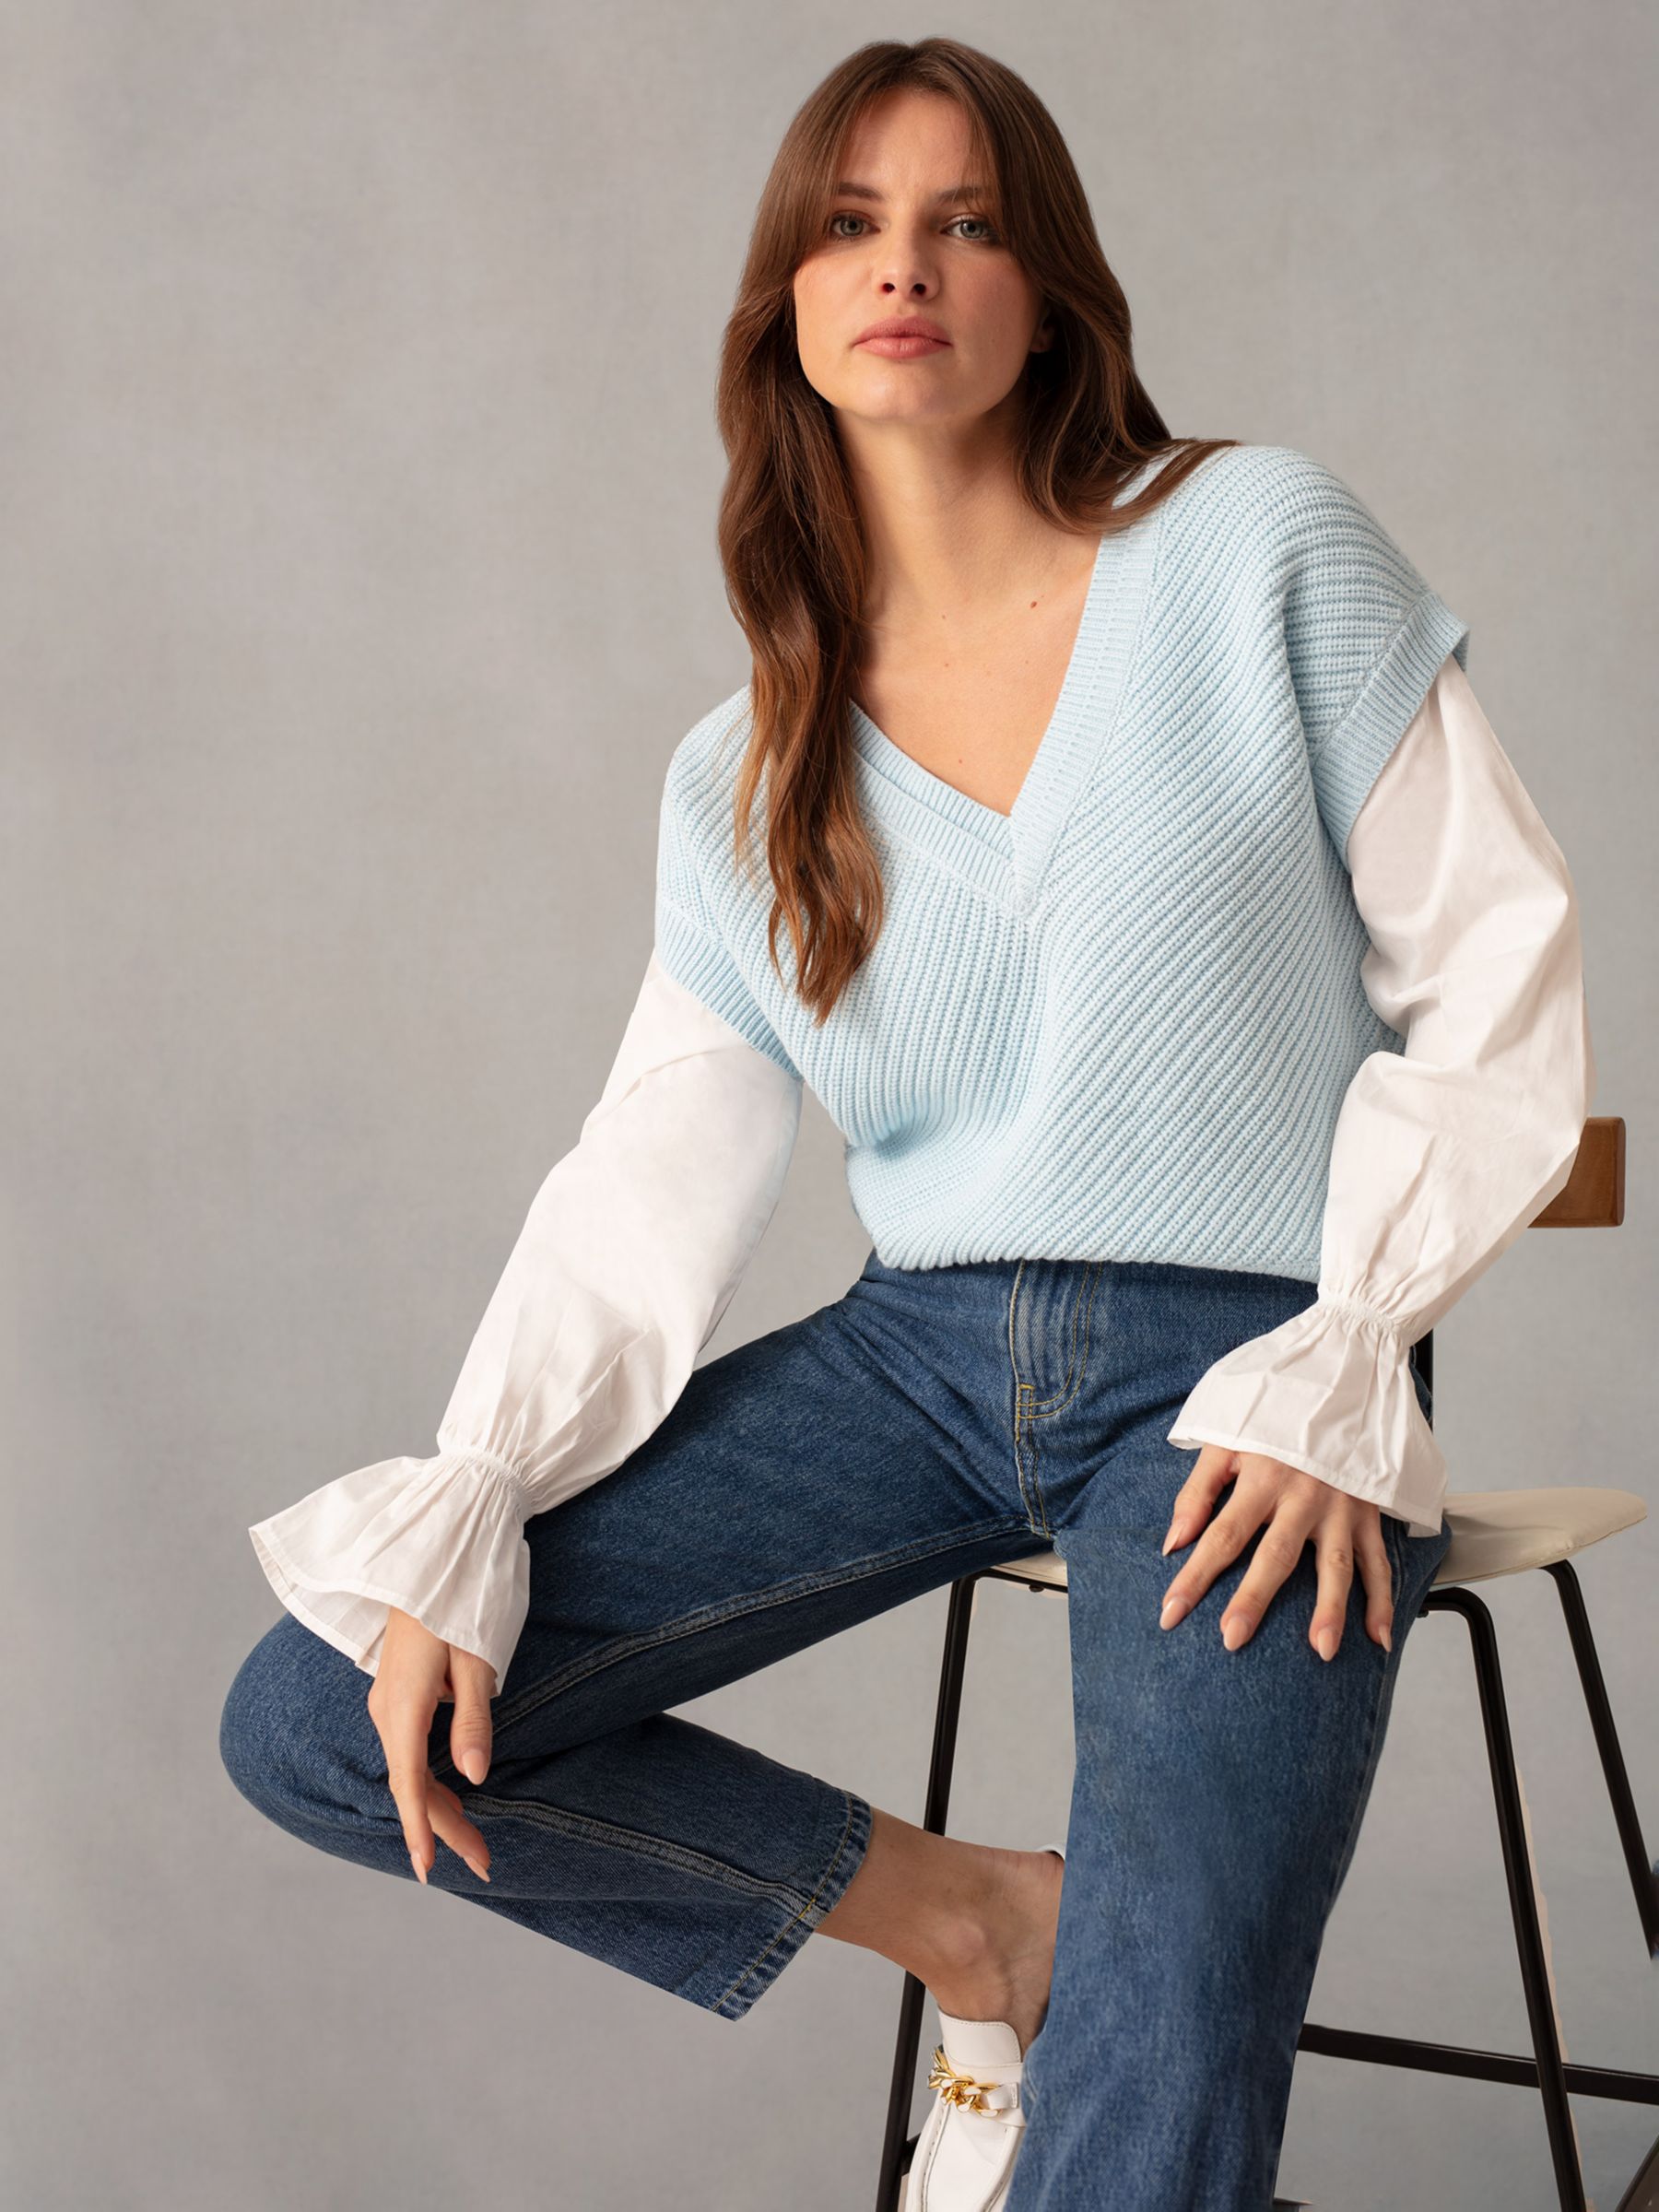 Ro&Zo 2-in-1 Shirt Sleeve Jumper, Blue/White at John Lewis & Partners